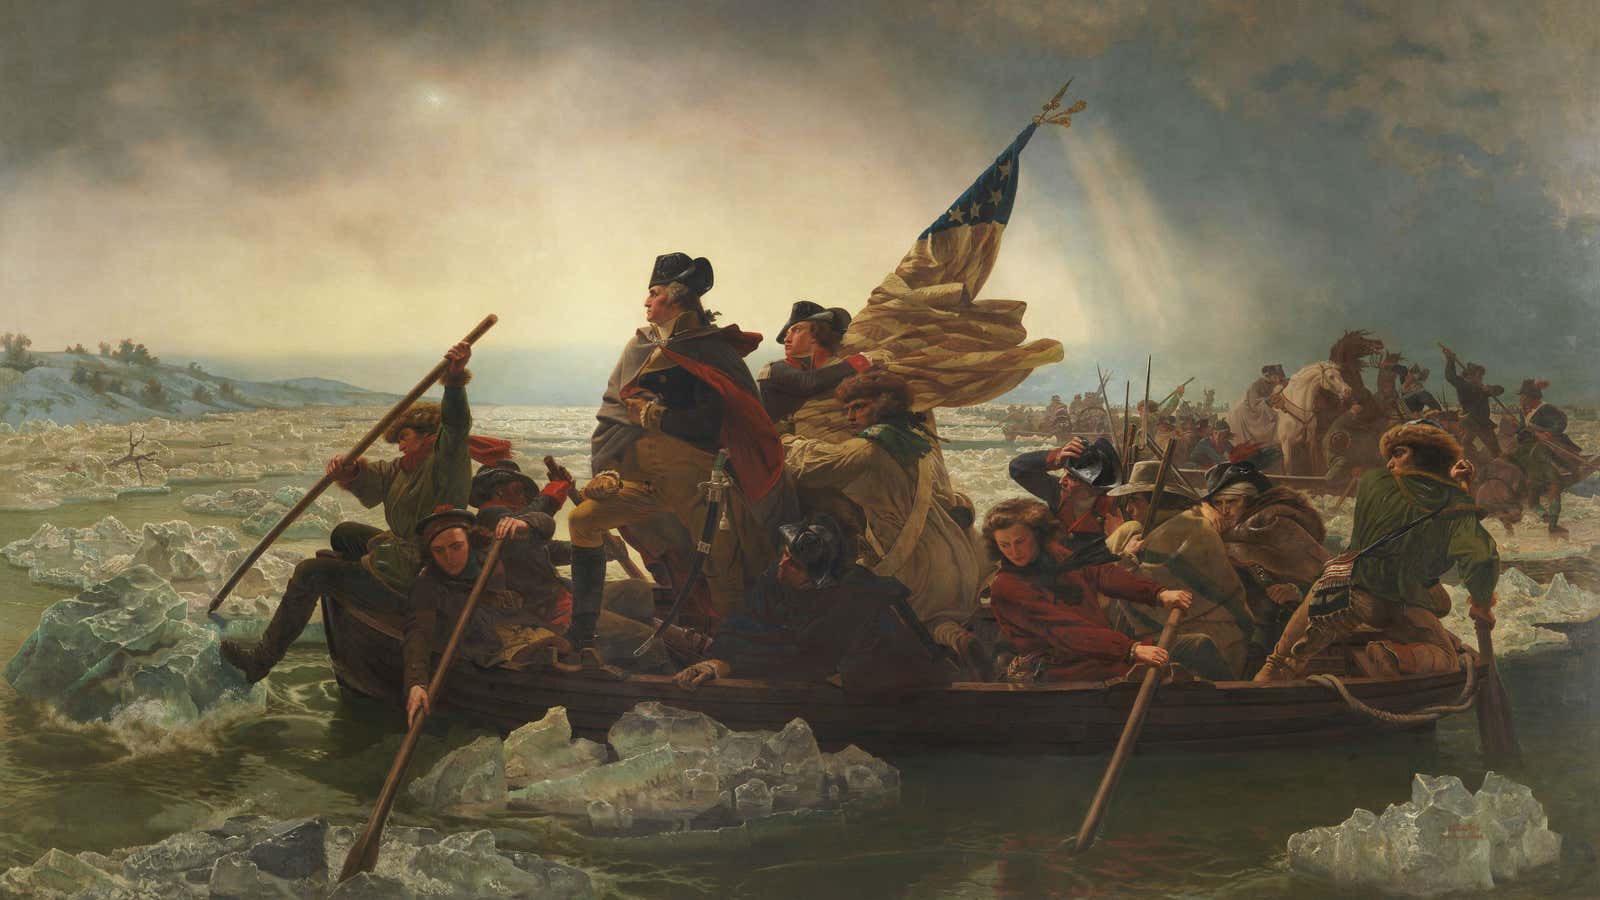 “Washington Crossing the Delaware” by Emanuel Leutze—the cardinal painting of the American Revolution.